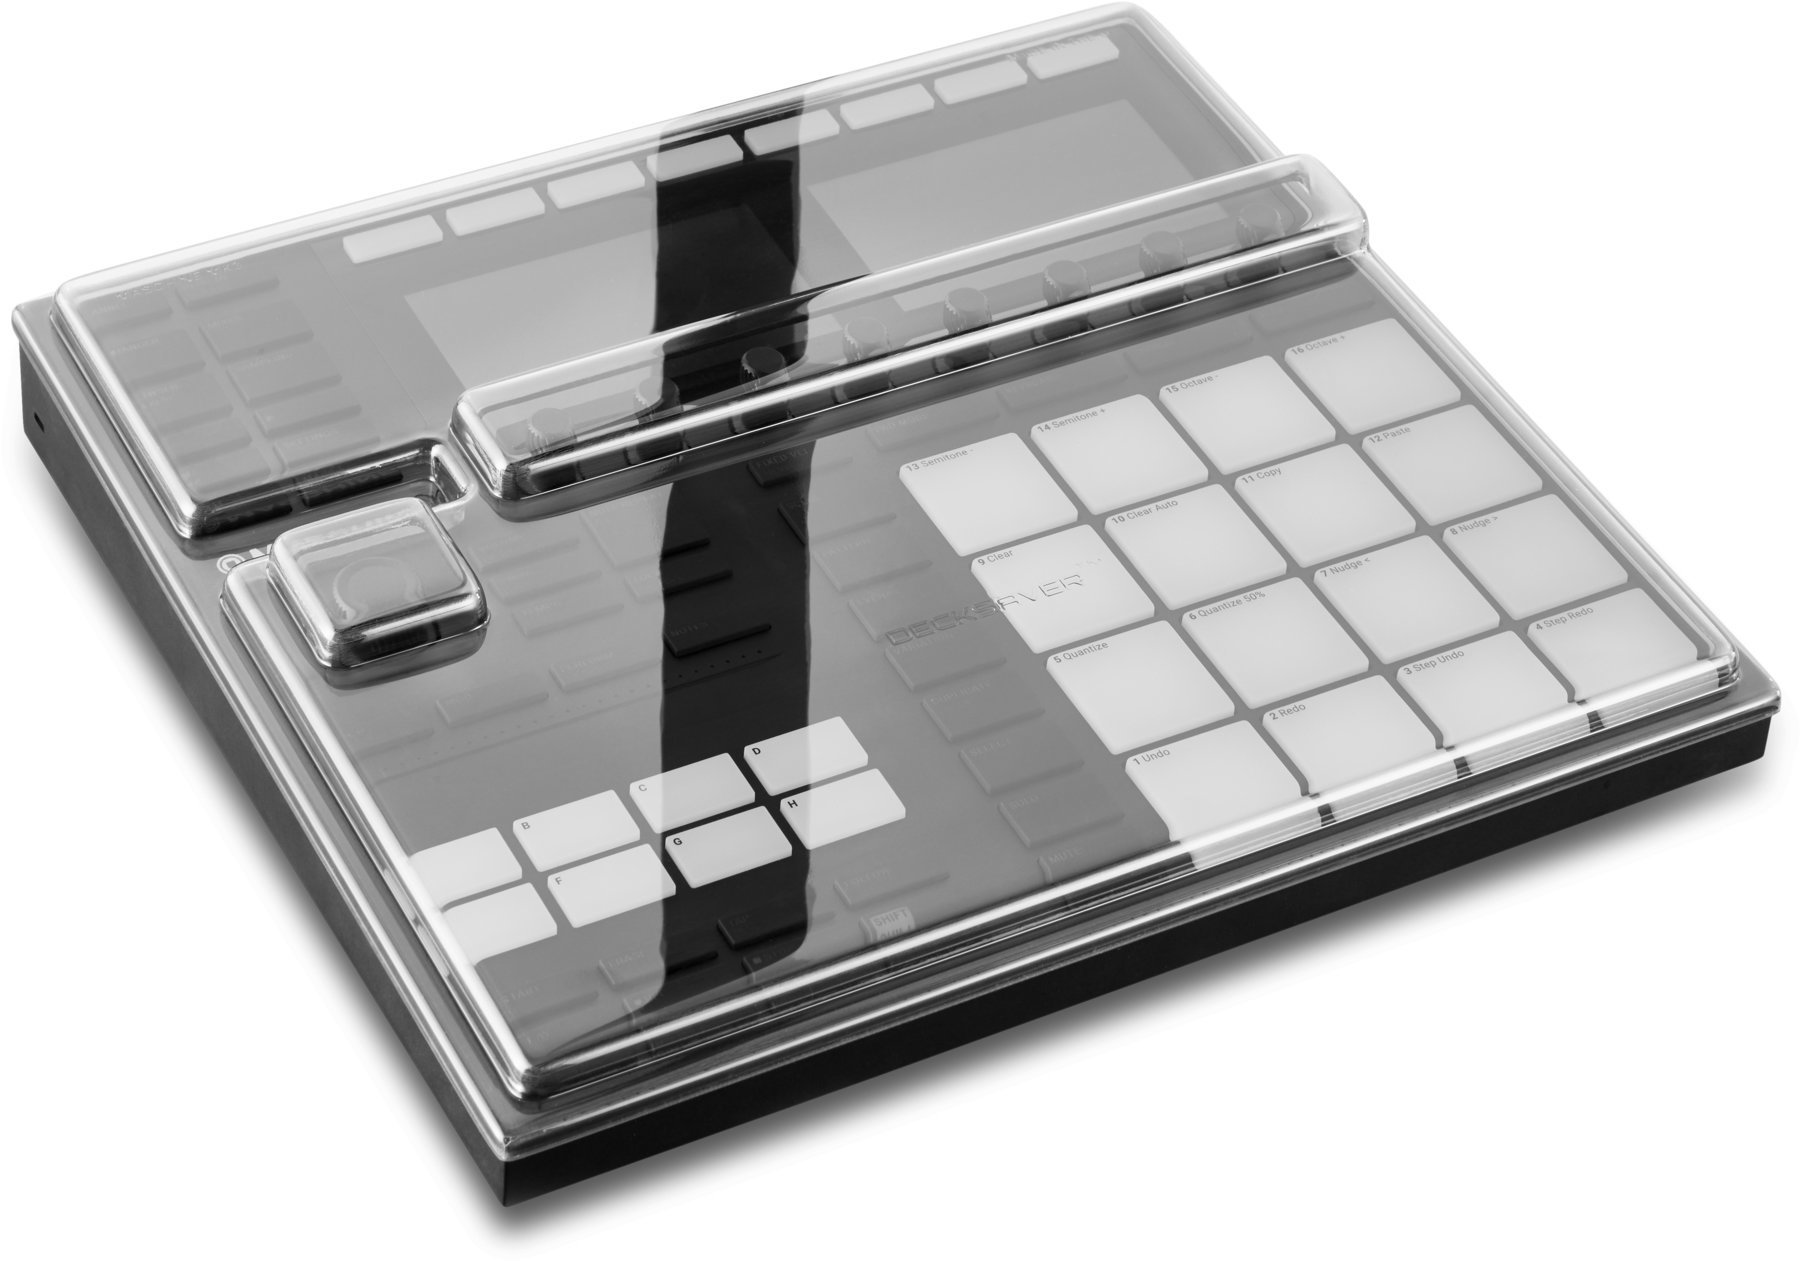 Protective cover cover for groovebox Decksaver Native Instruments Maschine MK3 (Just unboxed)